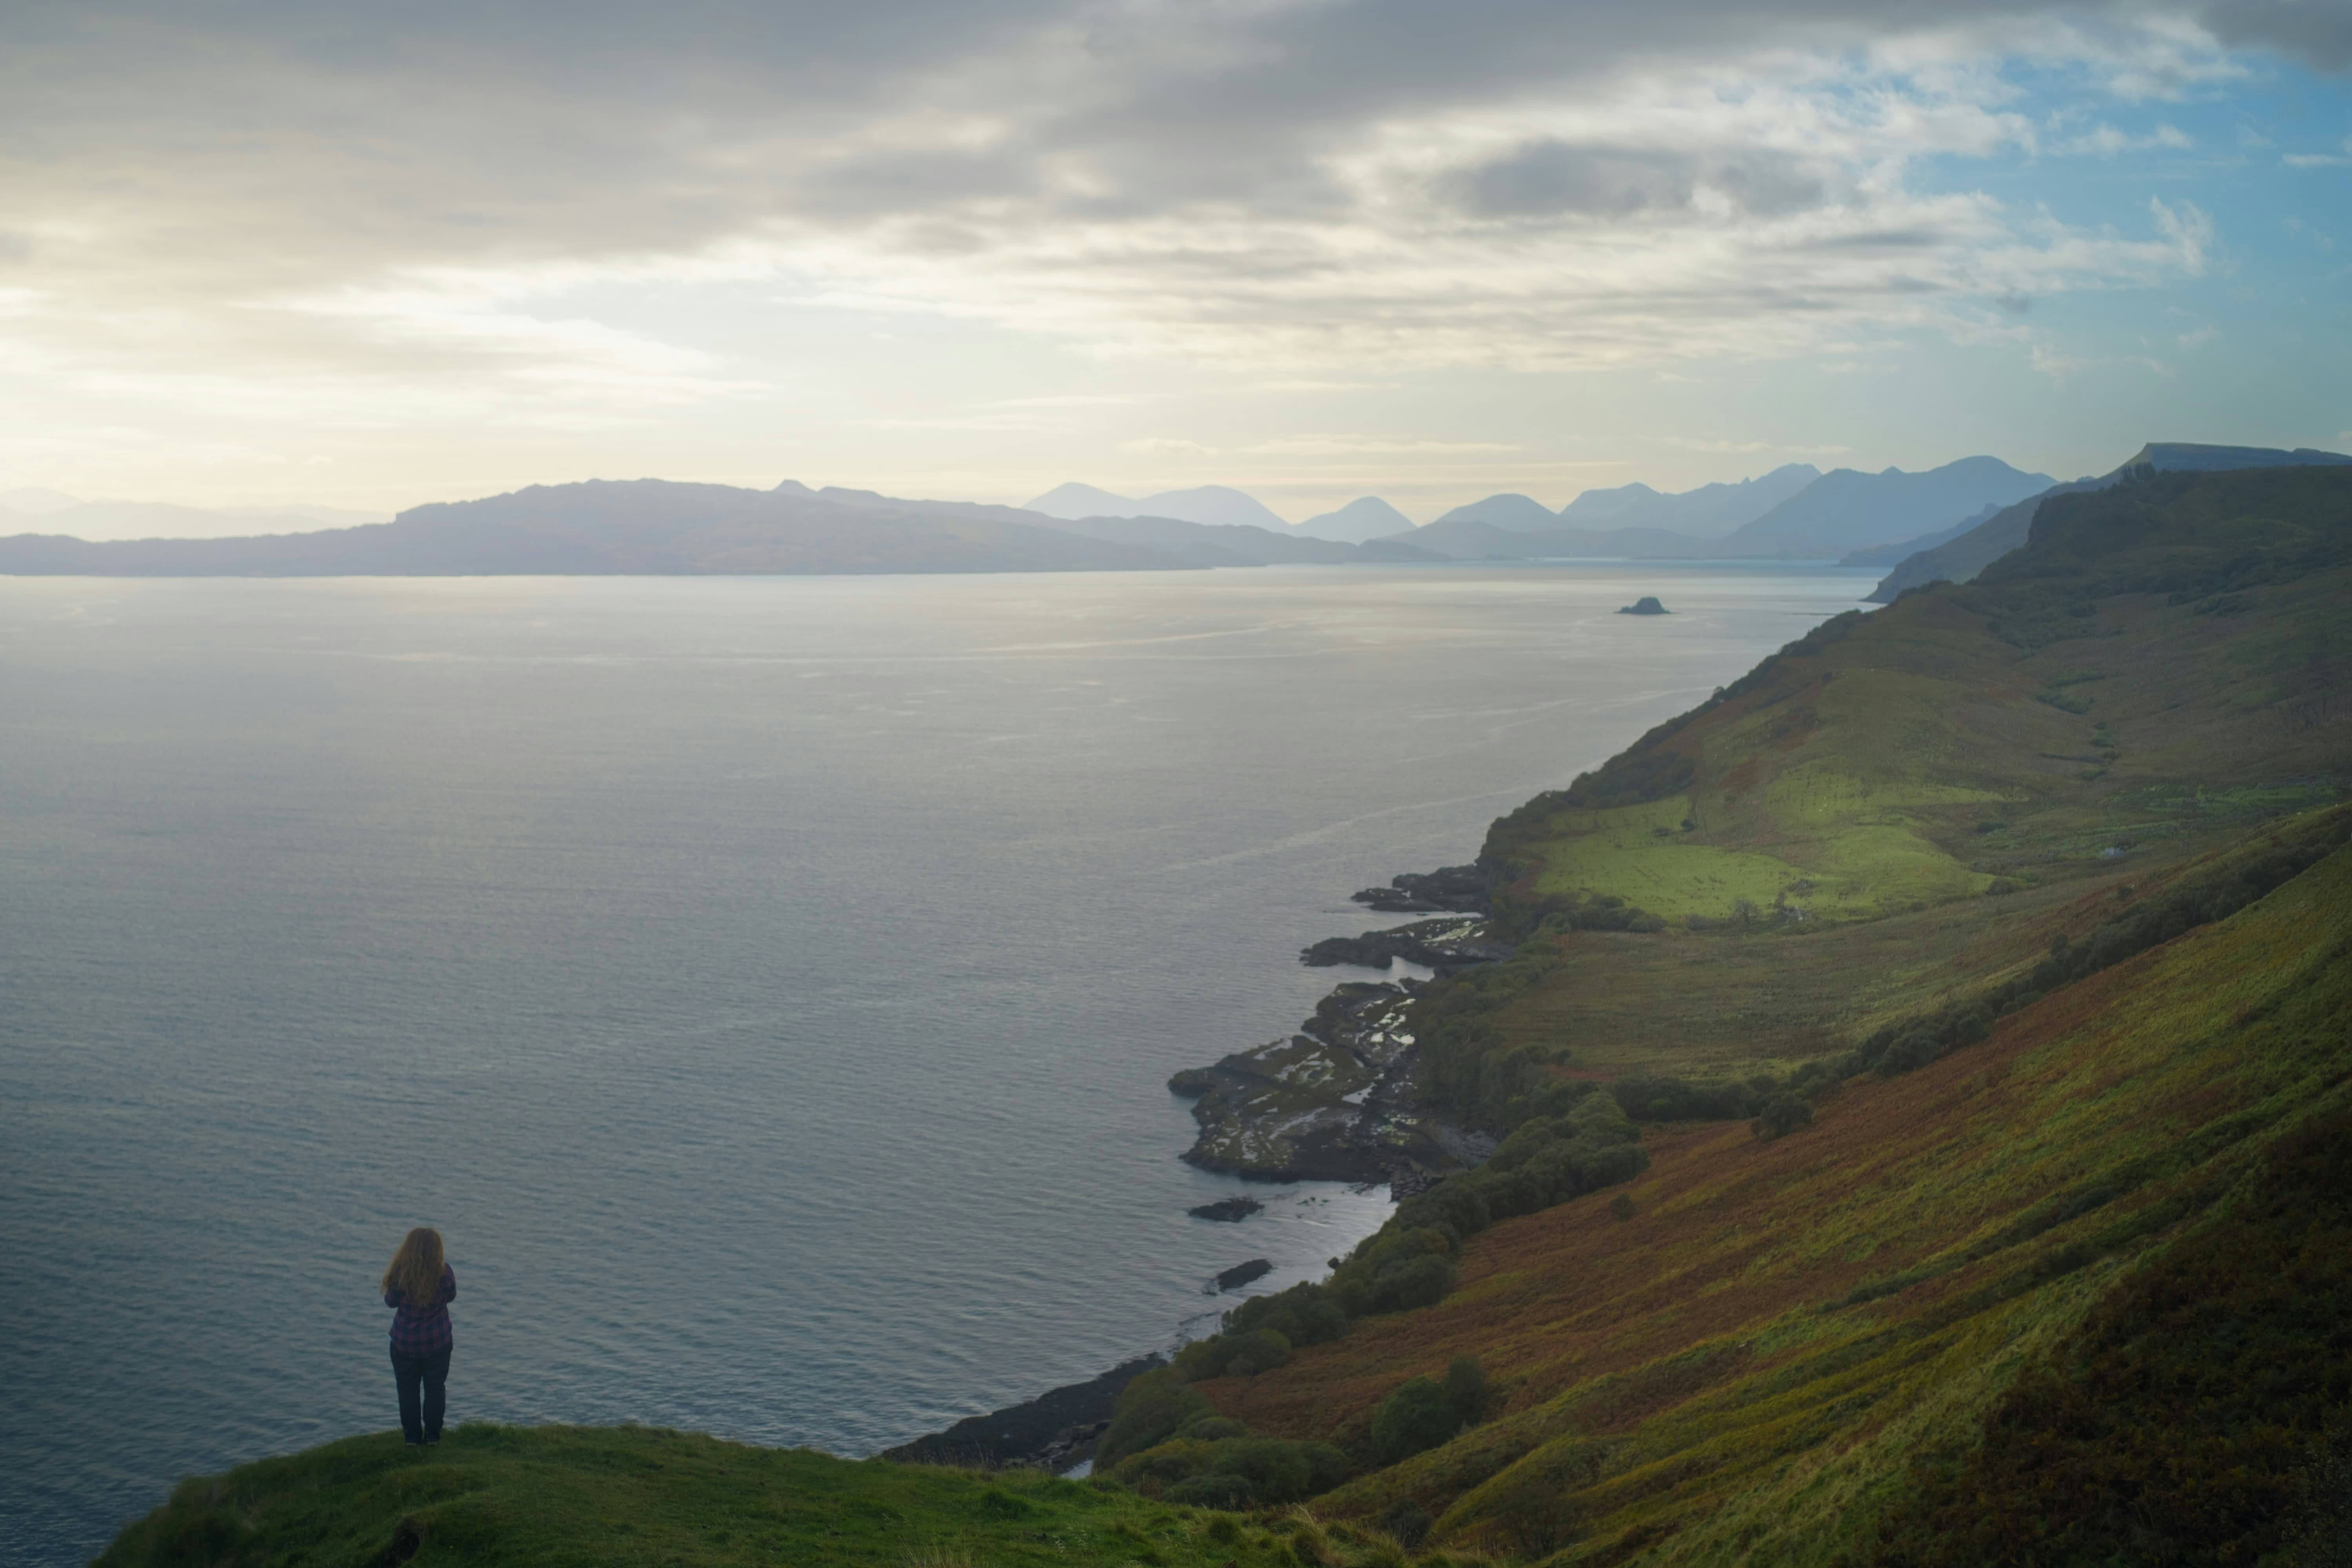 Later, we stopped off further south for this frankly ridiculous and wonderful vistan from Upper Tote, looking all the way down the Sound of Raasay towards the Red and Black Cuillins.